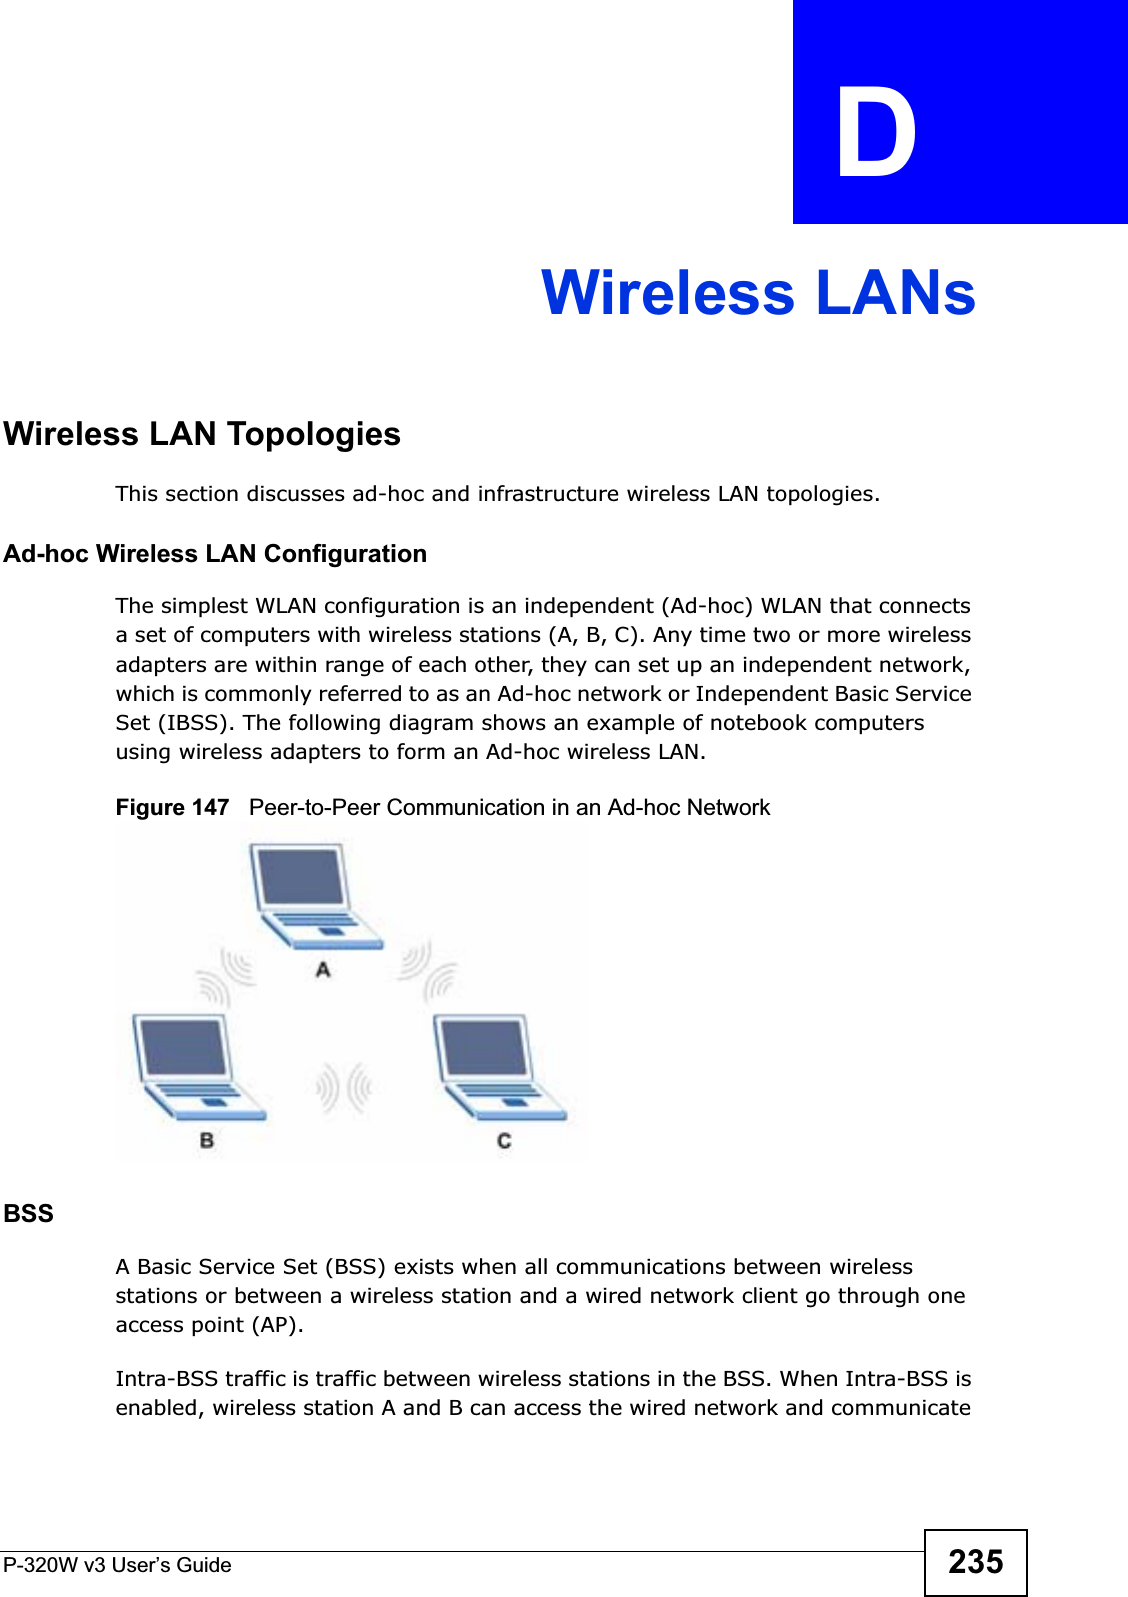 P-320W v3 User’s Guide 235APPENDIX  D Wireless LANsWireless LAN TopologiesThis section discusses ad-hoc and infrastructure wireless LAN topologies.Ad-hoc Wireless LAN ConfigurationThe simplest WLAN configuration is an independent (Ad-hoc) WLAN that connects a set of computers with wireless stations (A, B, C). Any time two or more wireless adapters are within range of each other, they can set up an independent network, which is commonly referred to as an Ad-hoc network or Independent Basic Service Set (IBSS). The following diagram shows an example of notebook computers using wireless adapters to form an Ad-hoc wireless LAN. Figure 147   Peer-to-Peer Communication in an Ad-hoc NetworkBSSA Basic Service Set (BSS) exists when all communications between wireless stations or between a wireless station and a wired network client go through one access point (AP). Intra-BSS traffic is traffic between wireless stations in the BSS. When Intra-BSS is enabled, wireless station A and B can access the wired network and communicate 